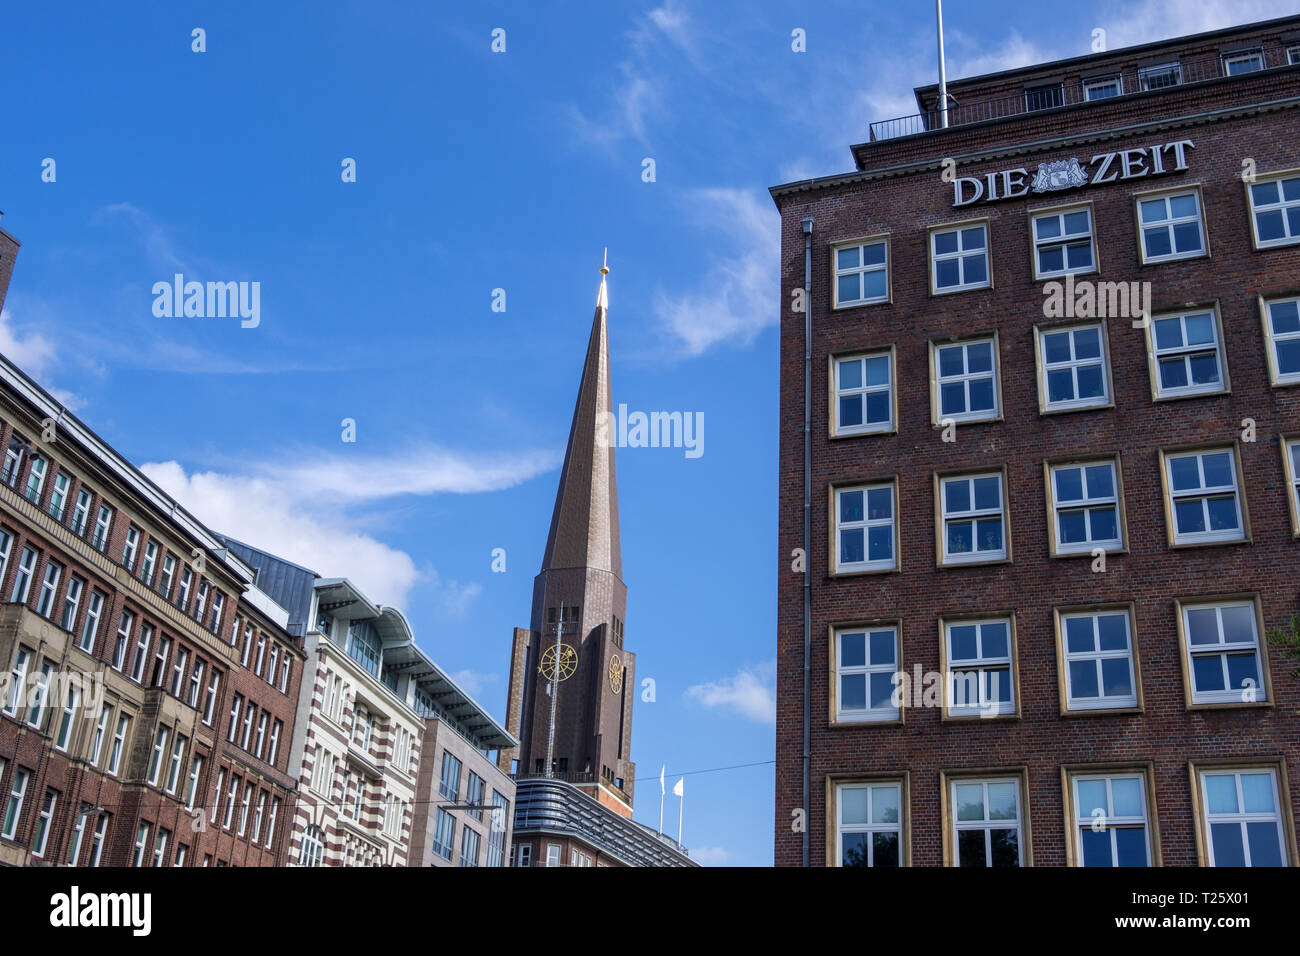 Hamburg, Germany - September 04, 2018: The main office building of a newspaper DIE ZEIT at the Domplatz in Hamburg, Germany. Stock Photo